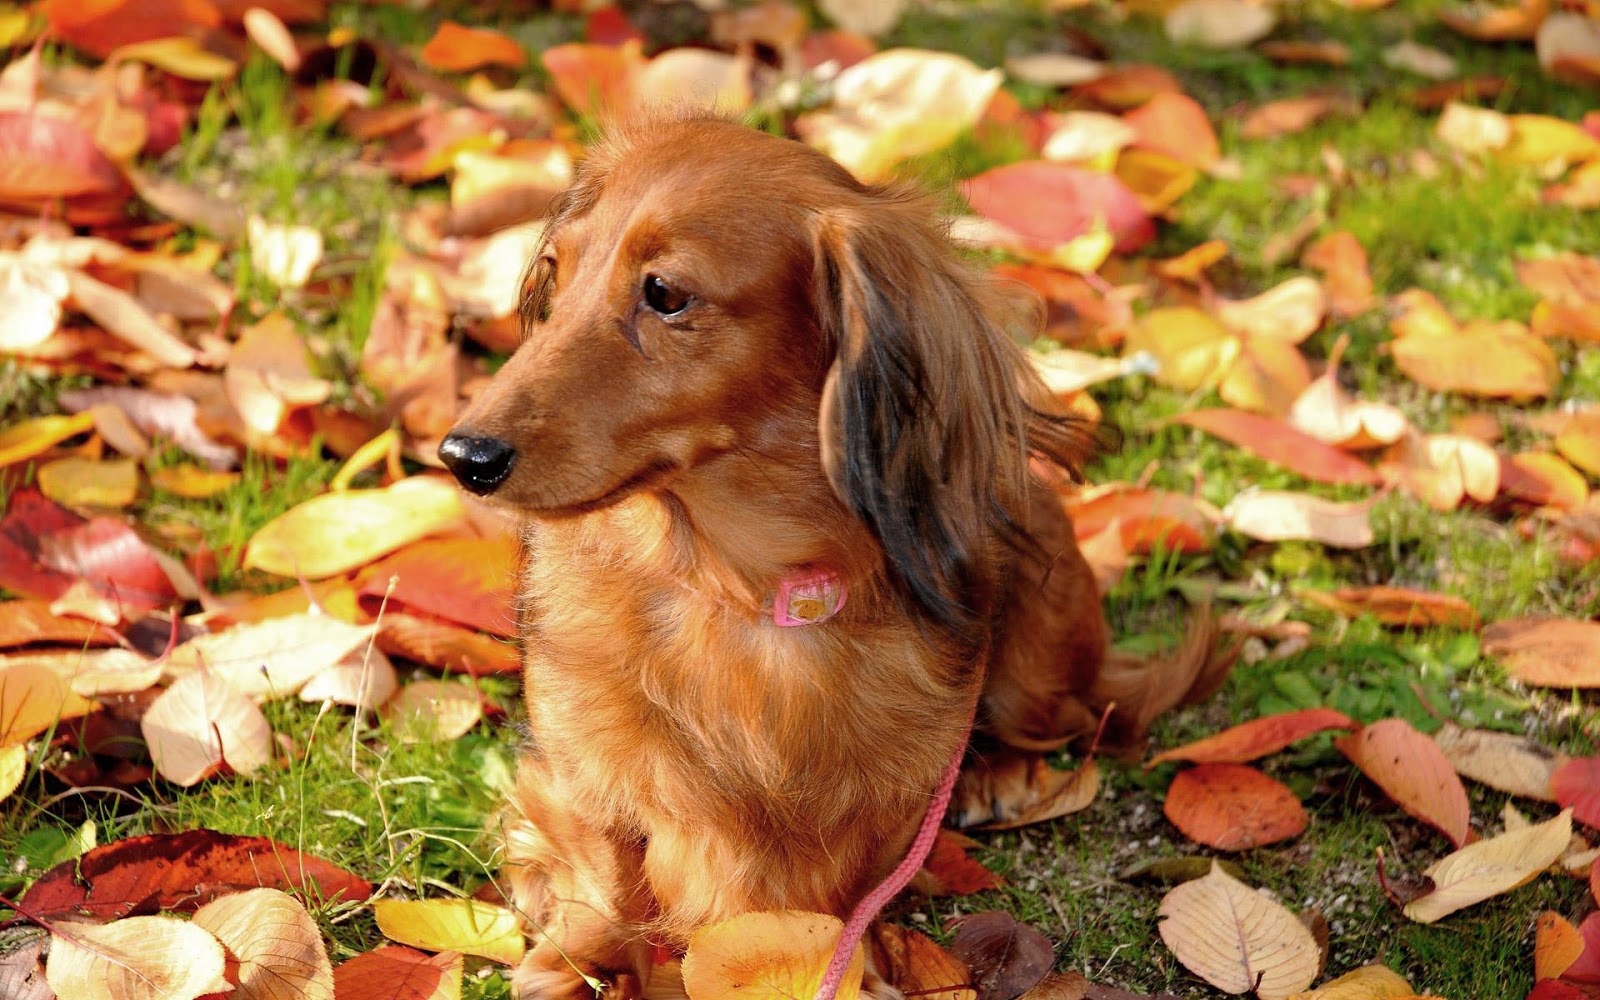 HD Animal Photo Of A Dog With Autumn Leaves Dogs Wallpaper